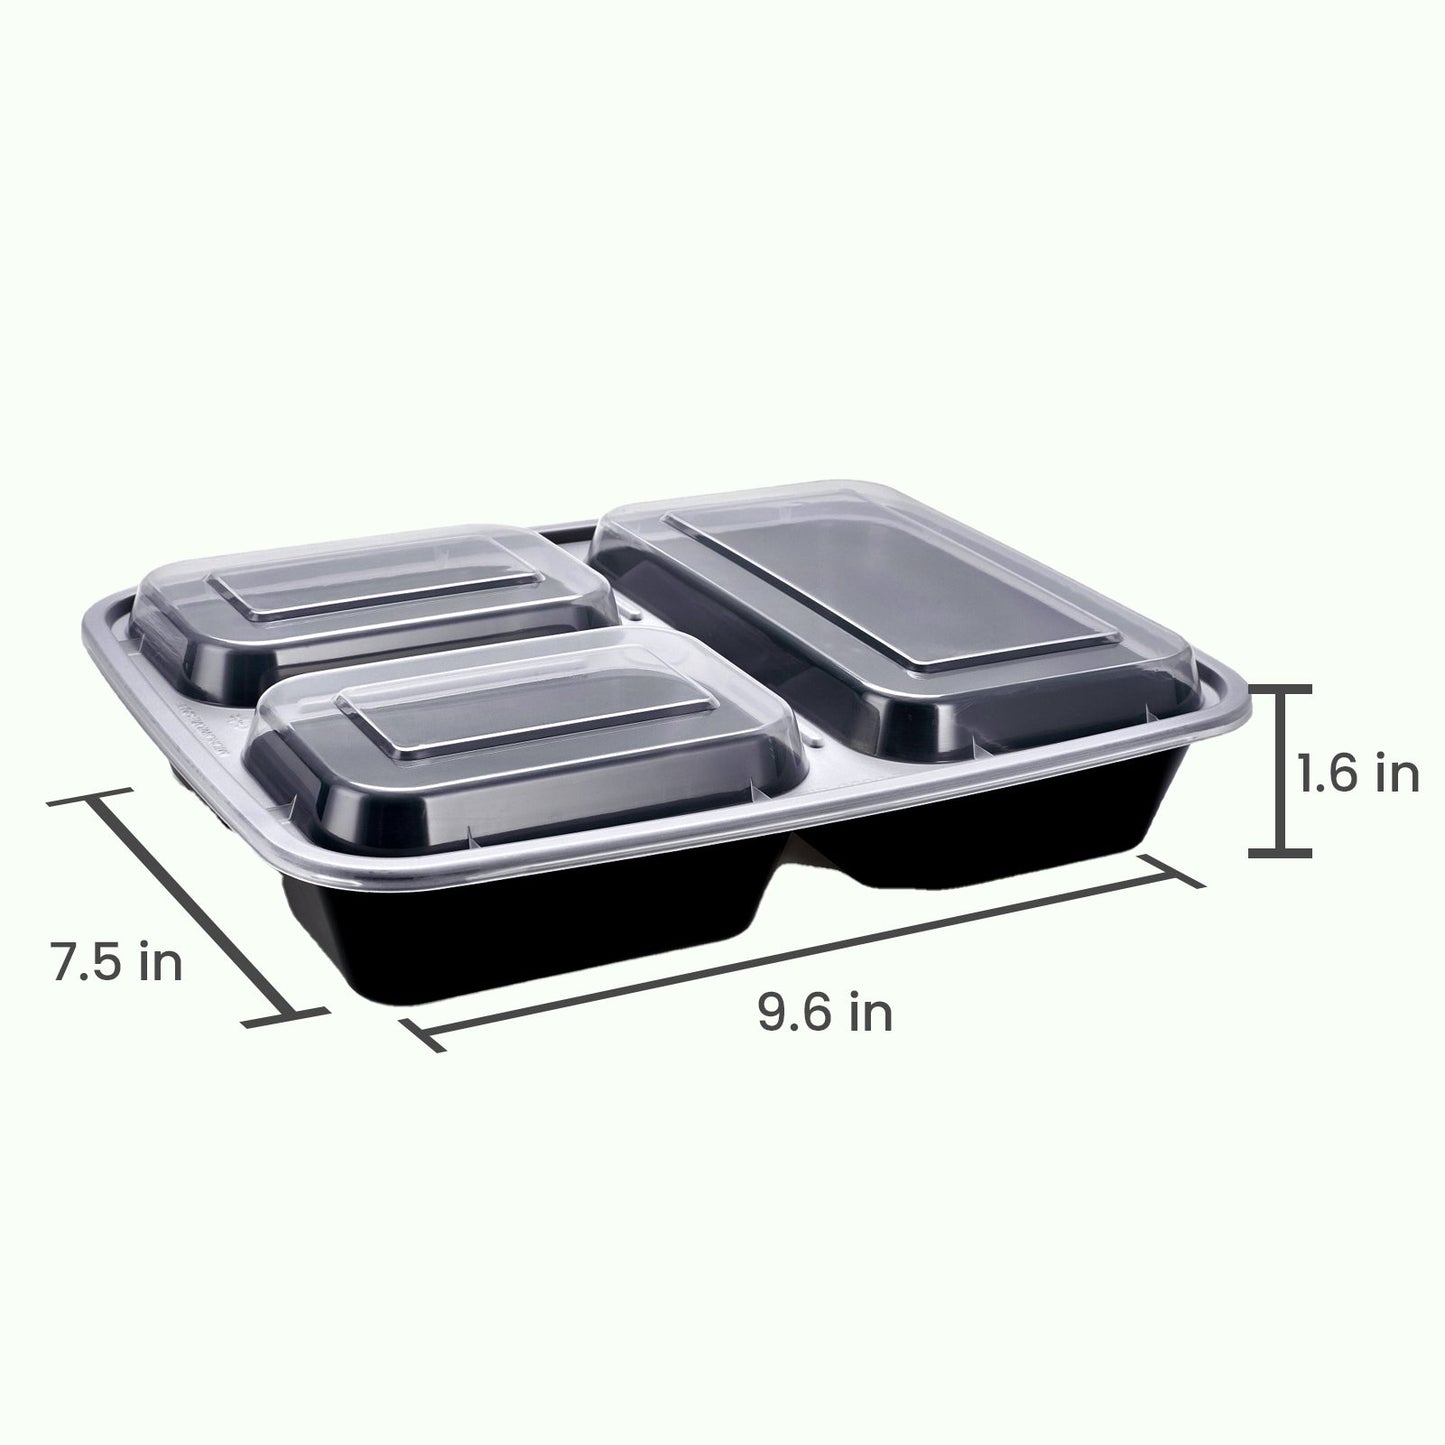 Meal Prep Containers Bento Box 20-pc. 3-Compartment Container Set*2